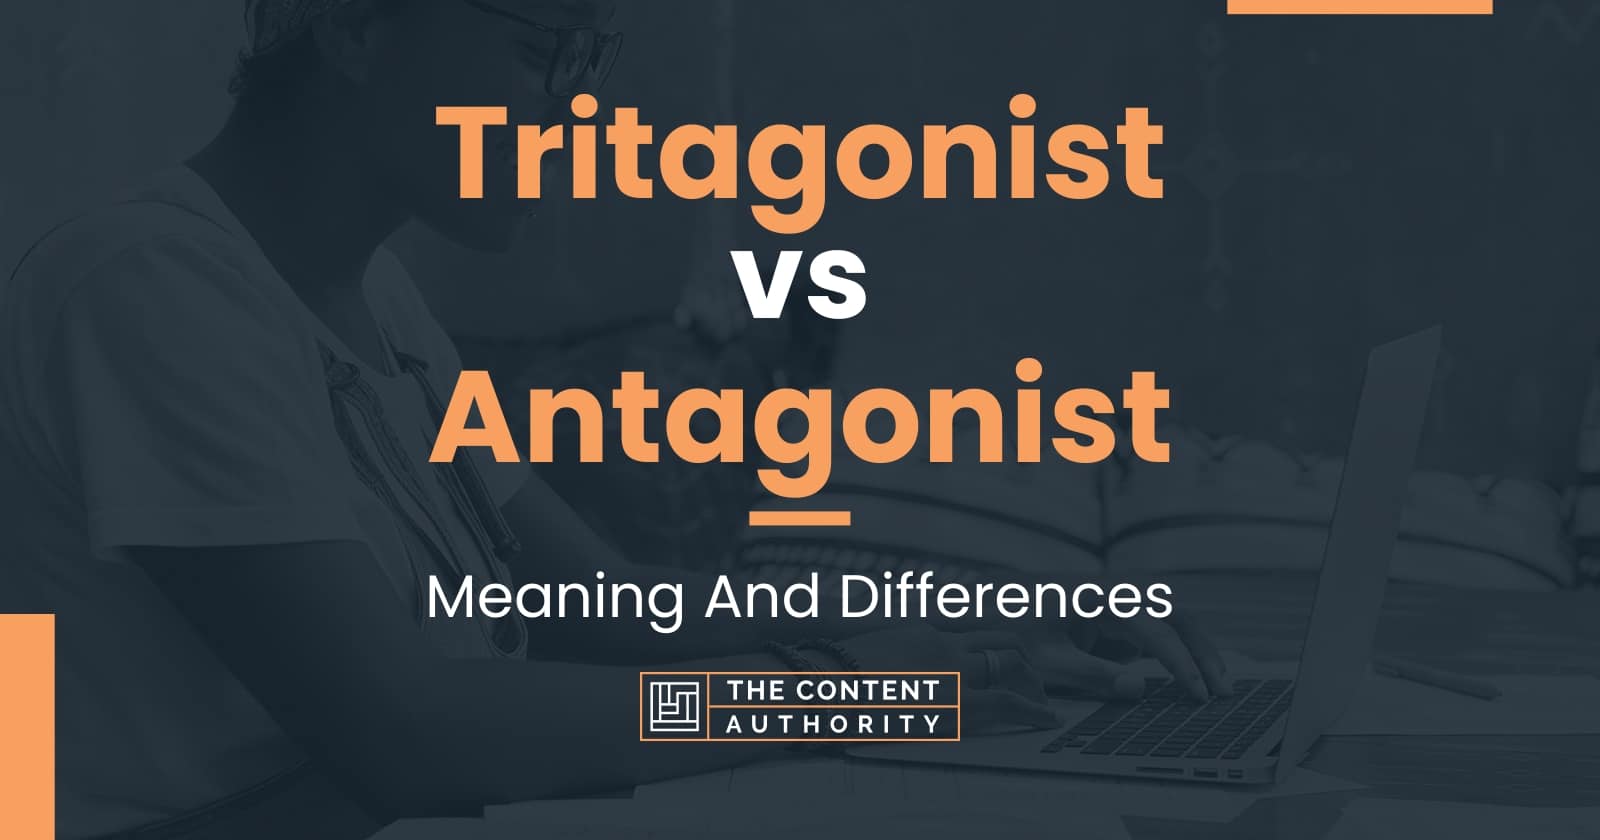 Tritagonist vs Antagonist: Meaning And Differences